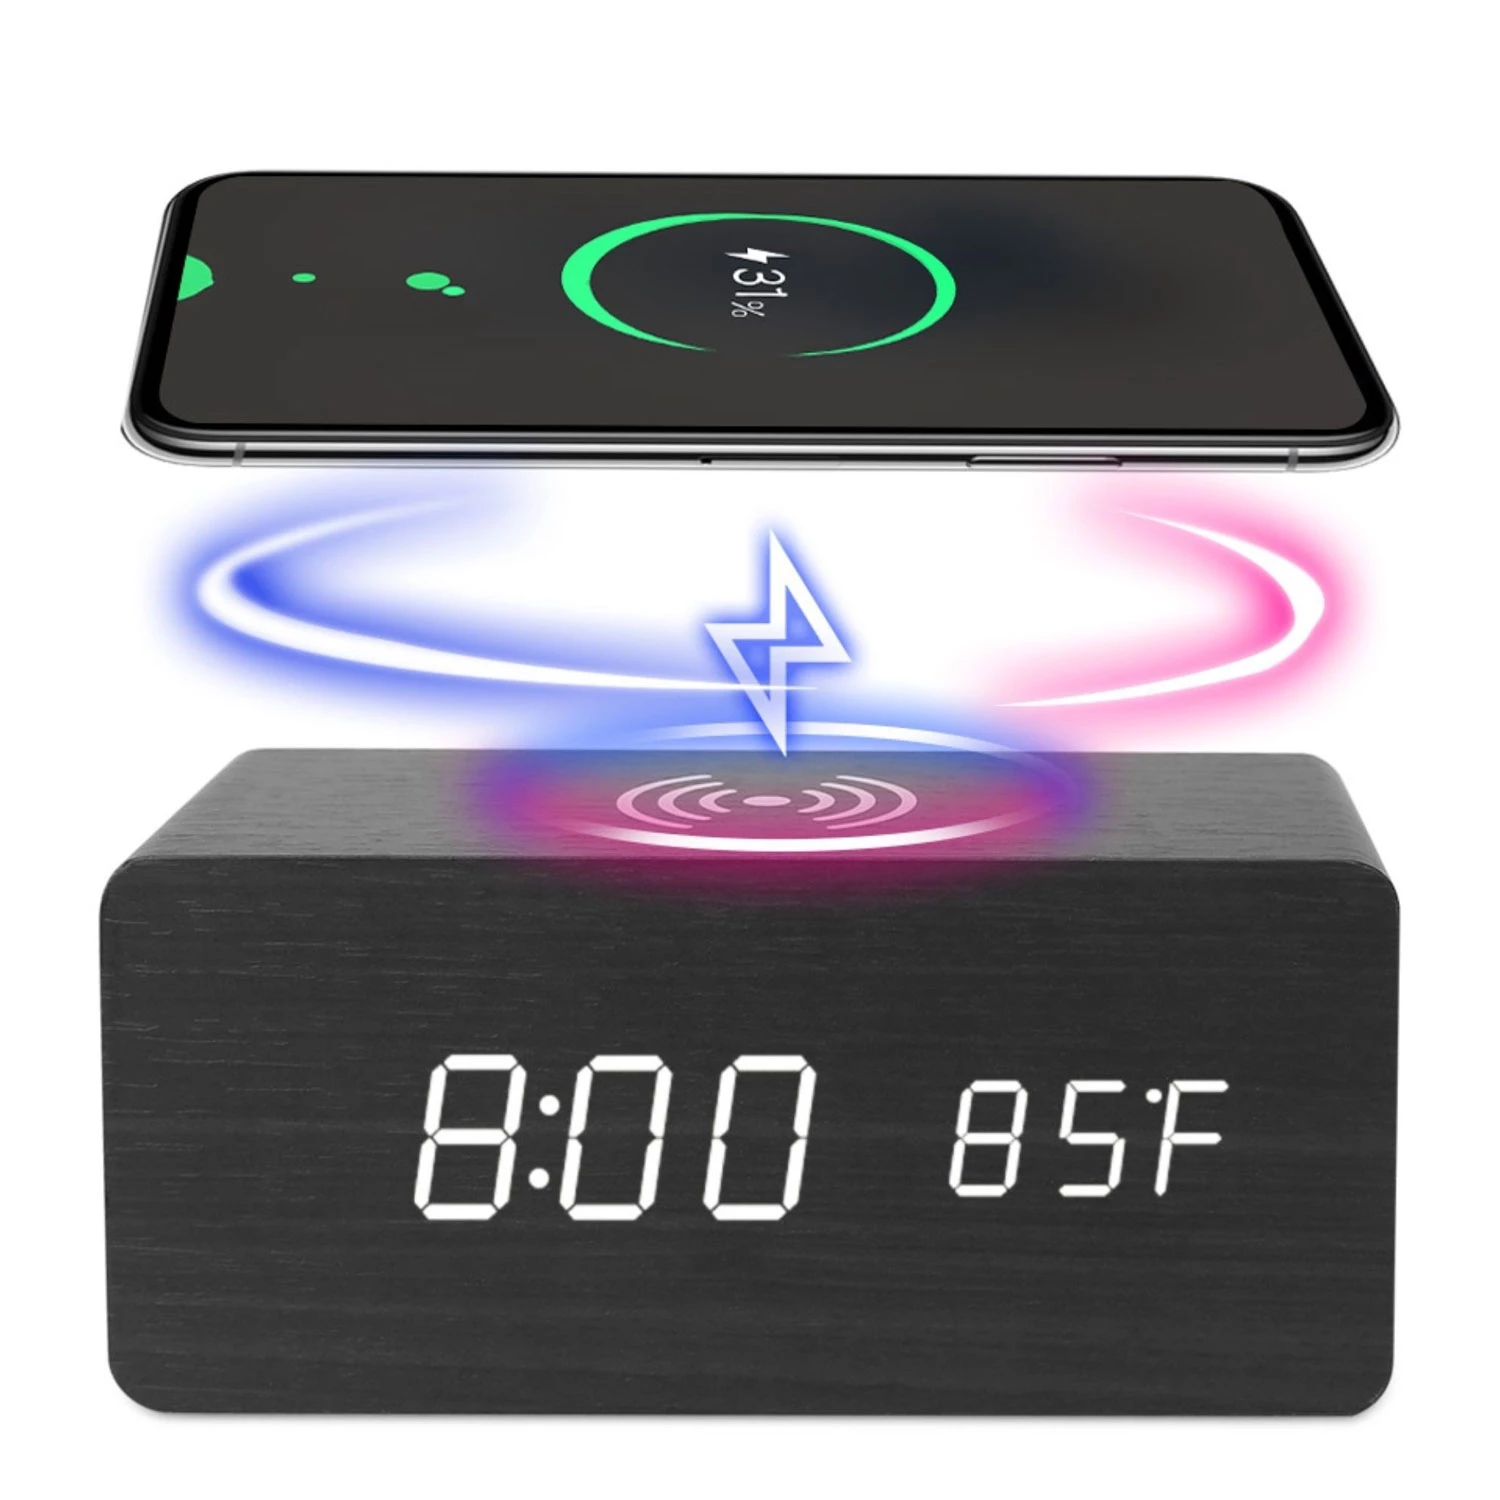 Wireless Charger Alarm Clock with Voice Control And Temperature Display